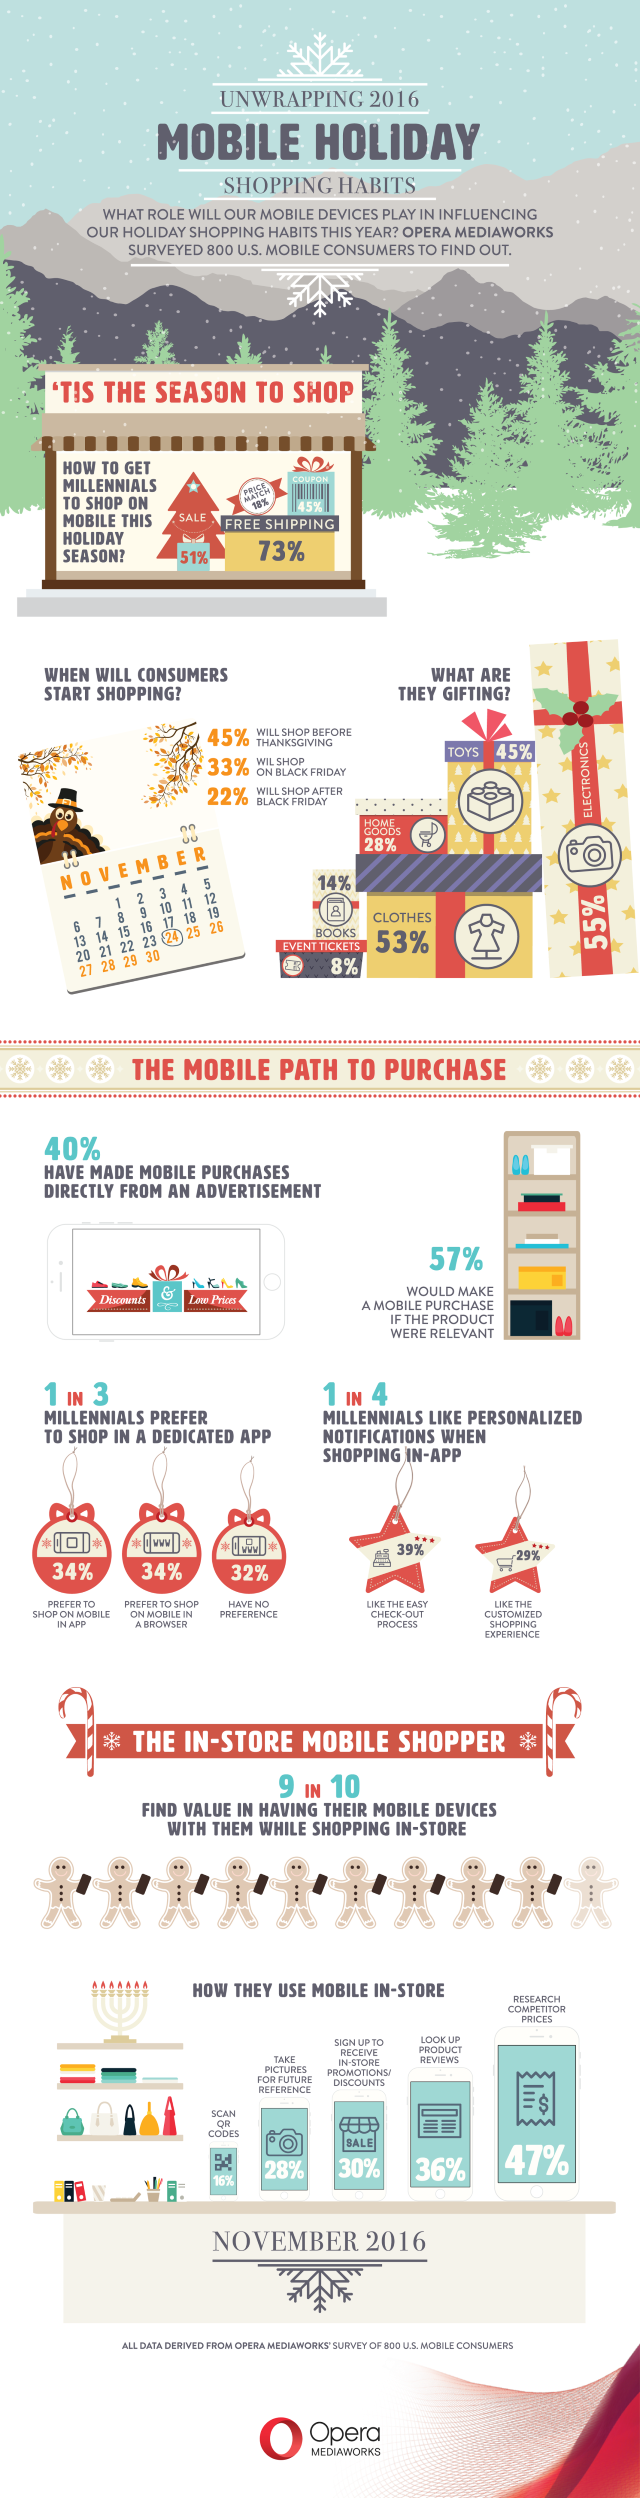 Opera mobile shopping infographic